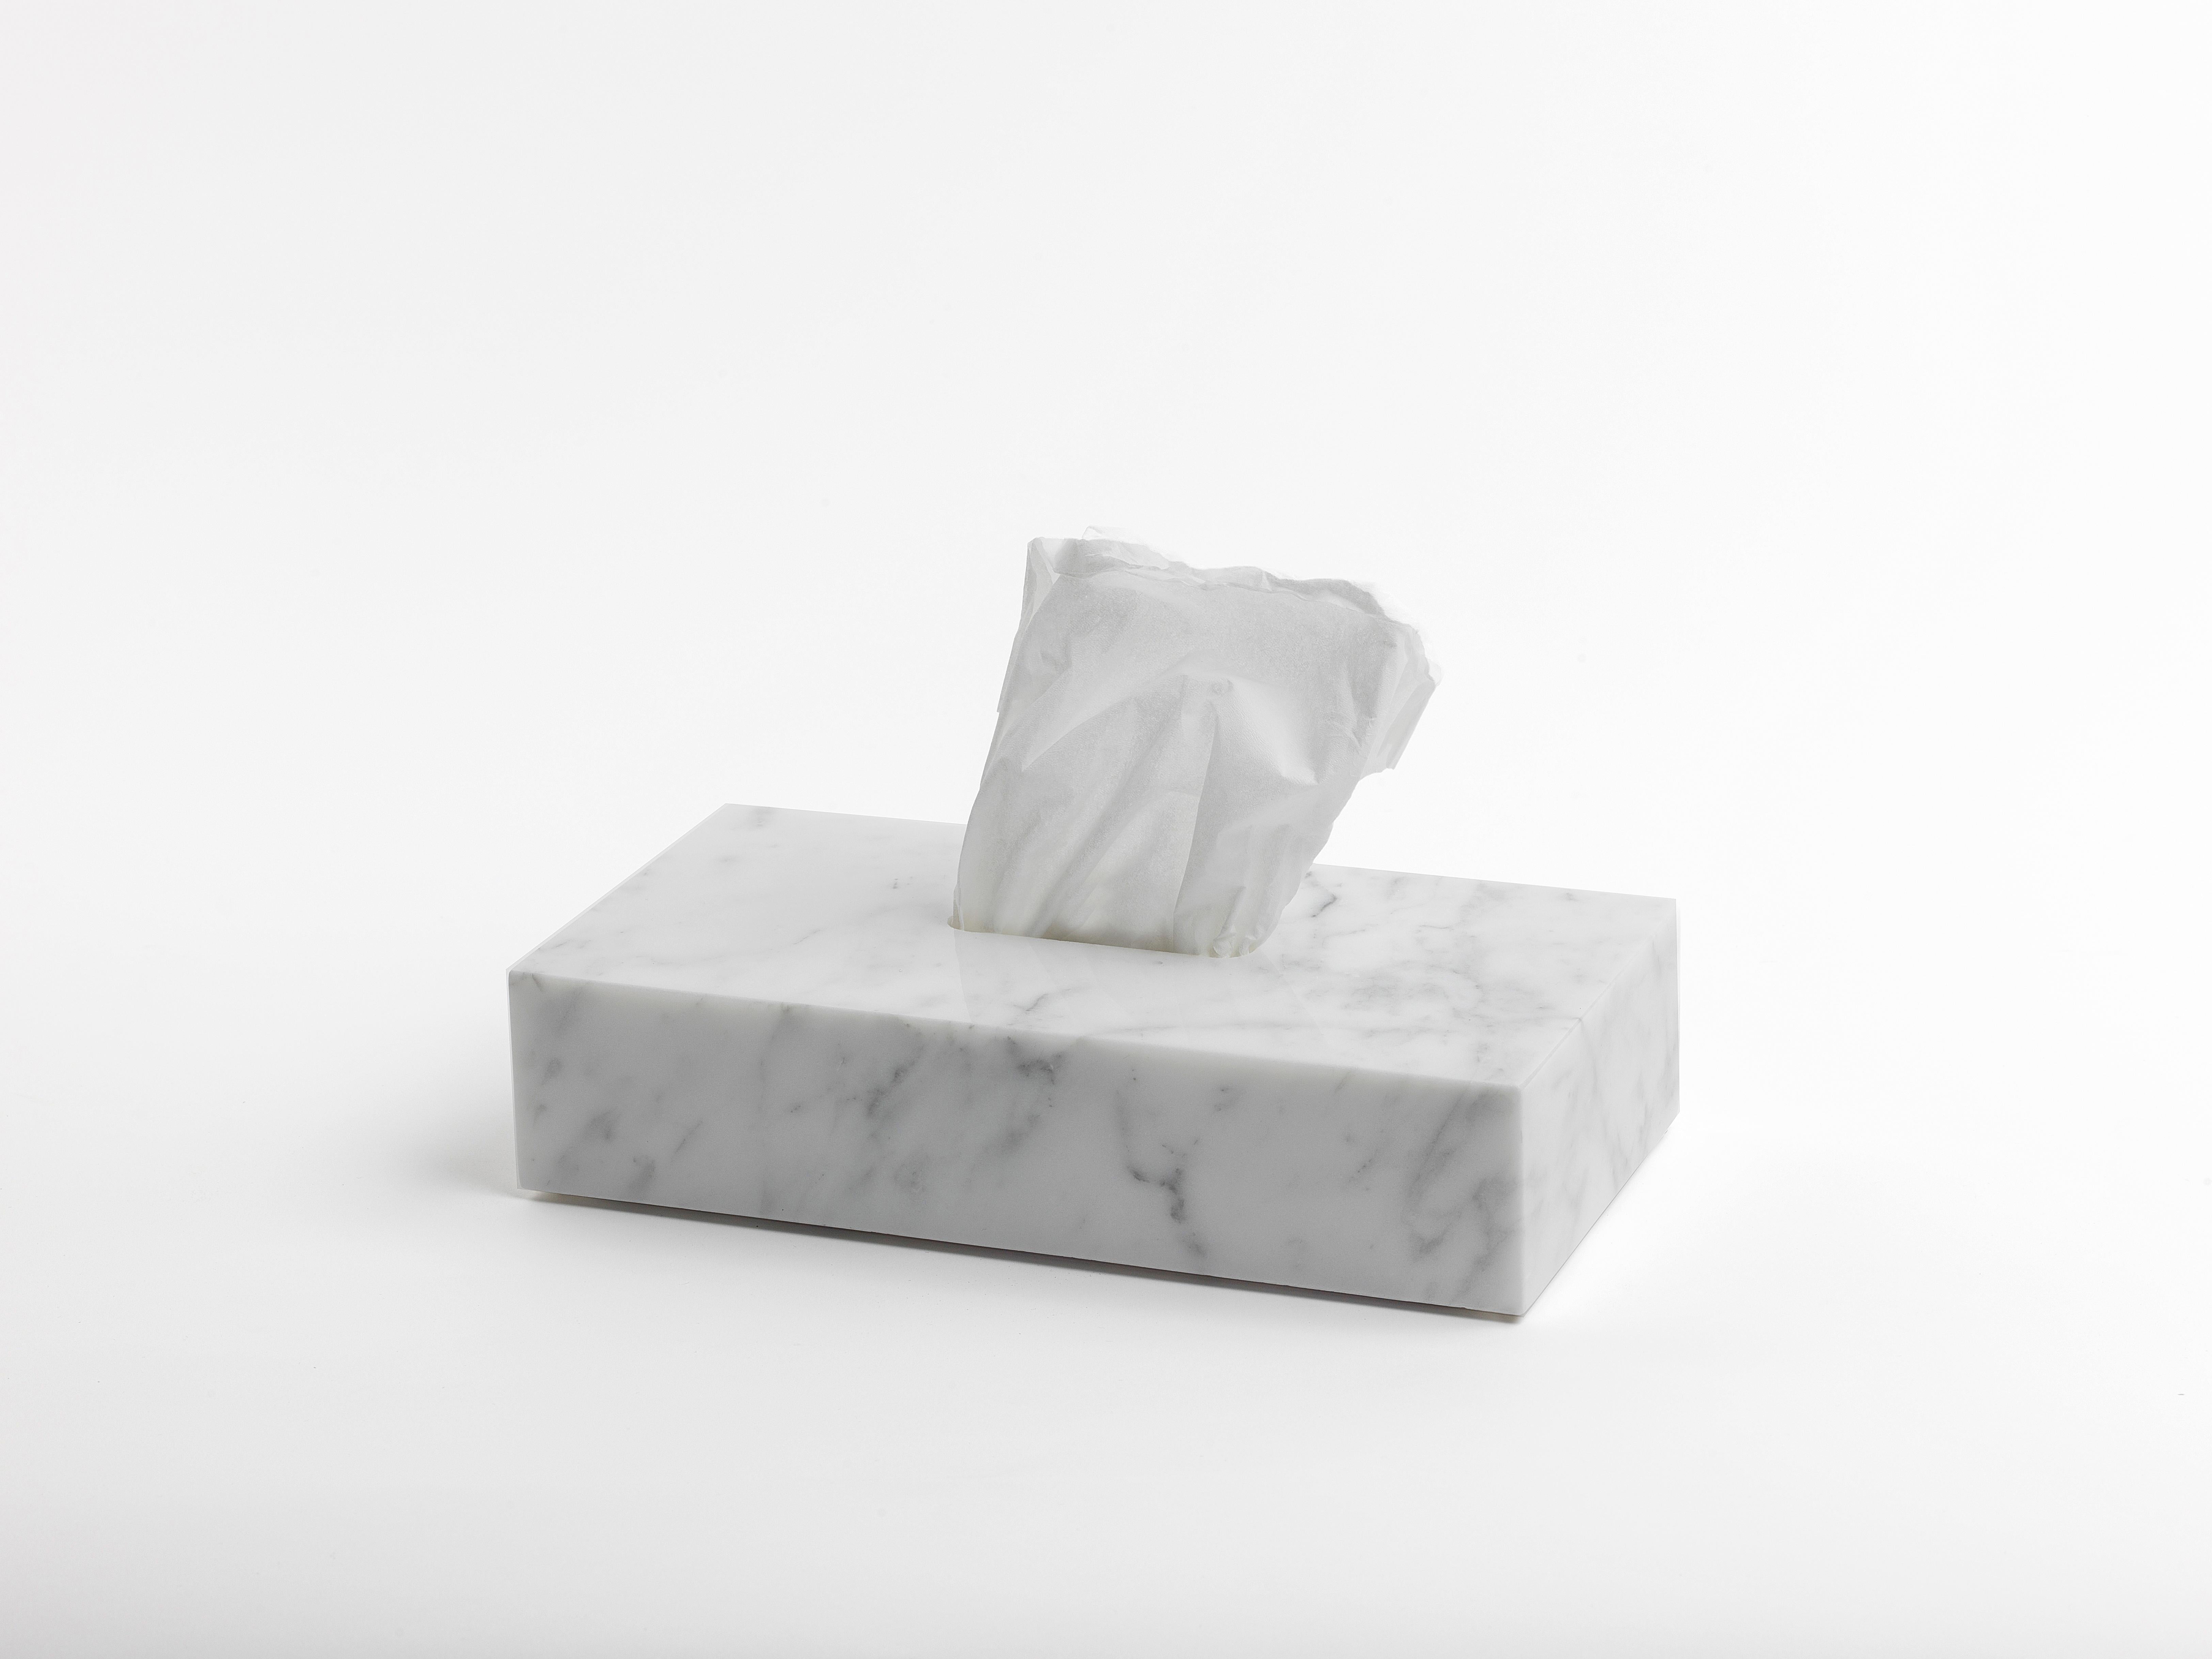 Squared tissue cover box in white Carrara marble.
Each piece is in a way unique (since each marble block is different in veins and shades) and handcrafted in Italy. Slight variations in shape, color and size are to be considered a guarantee of an